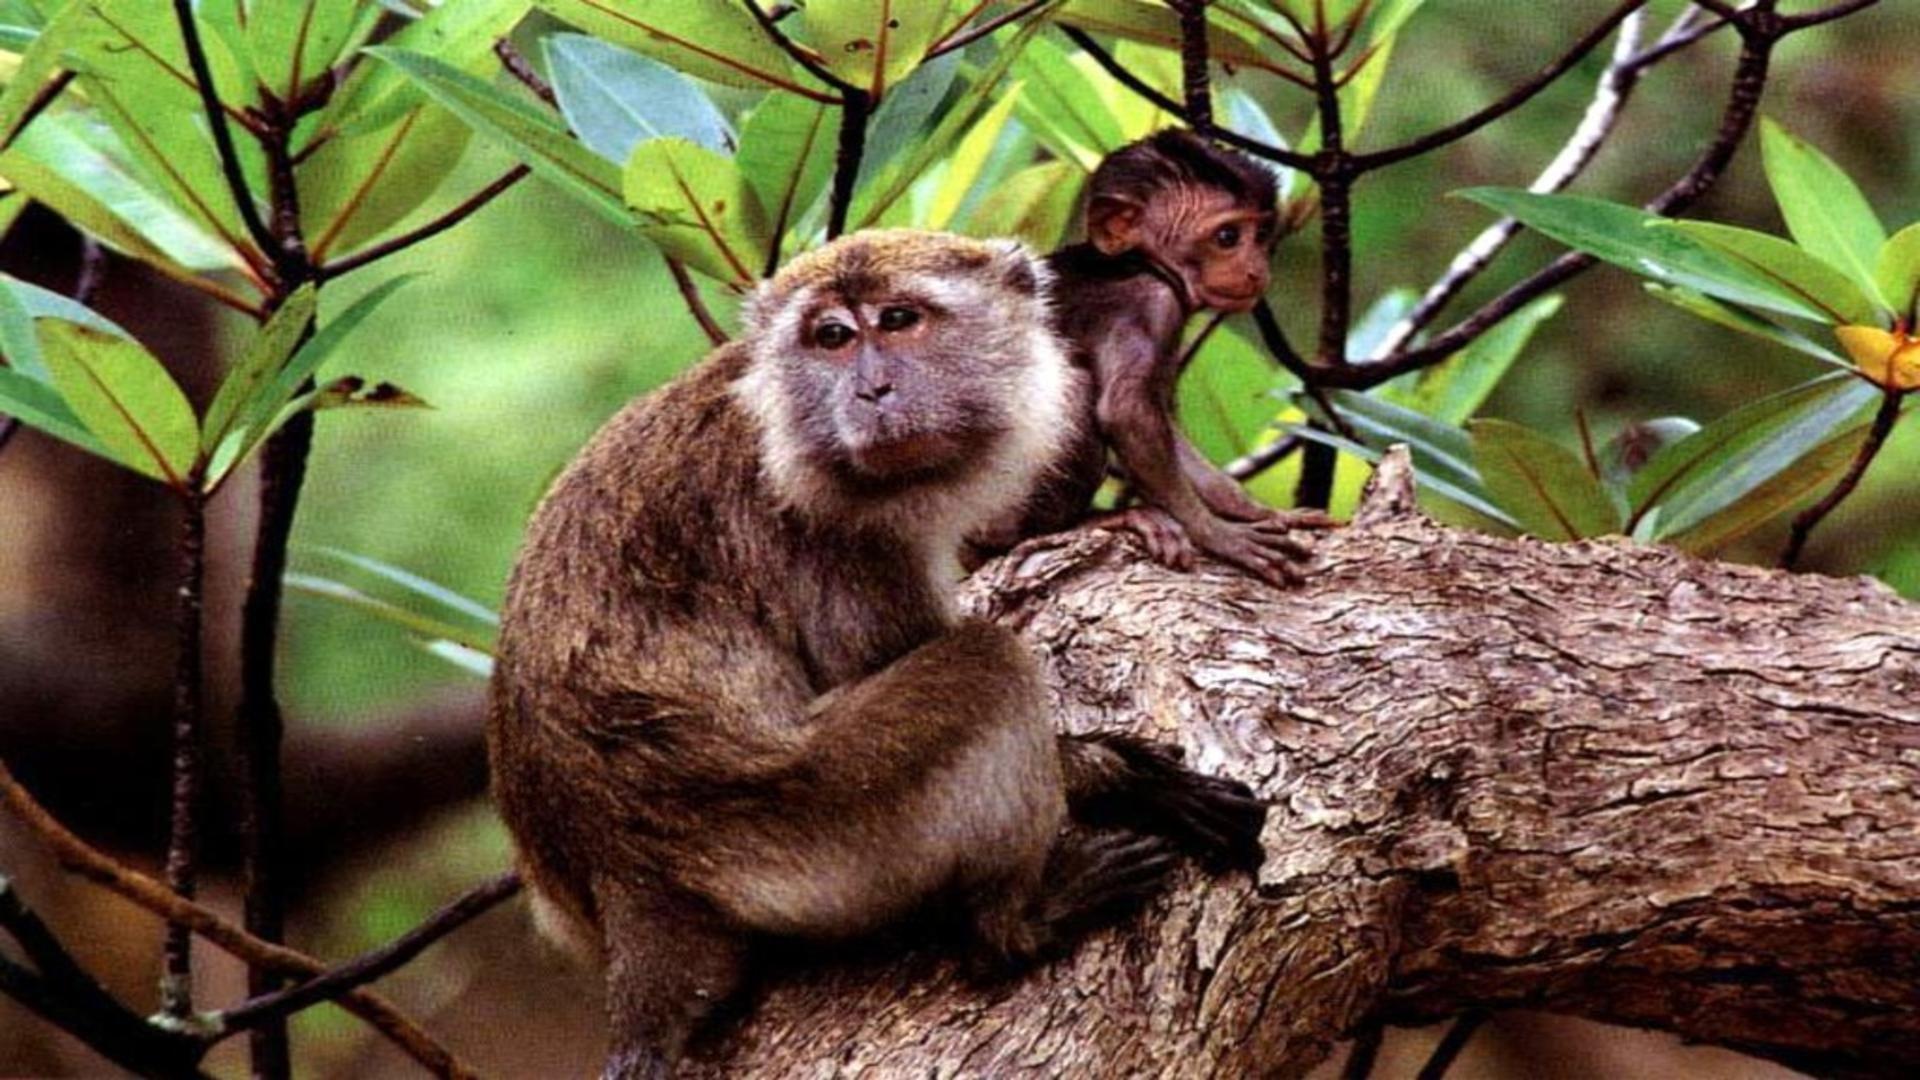 Baby and mother monkey in tree free desktop background